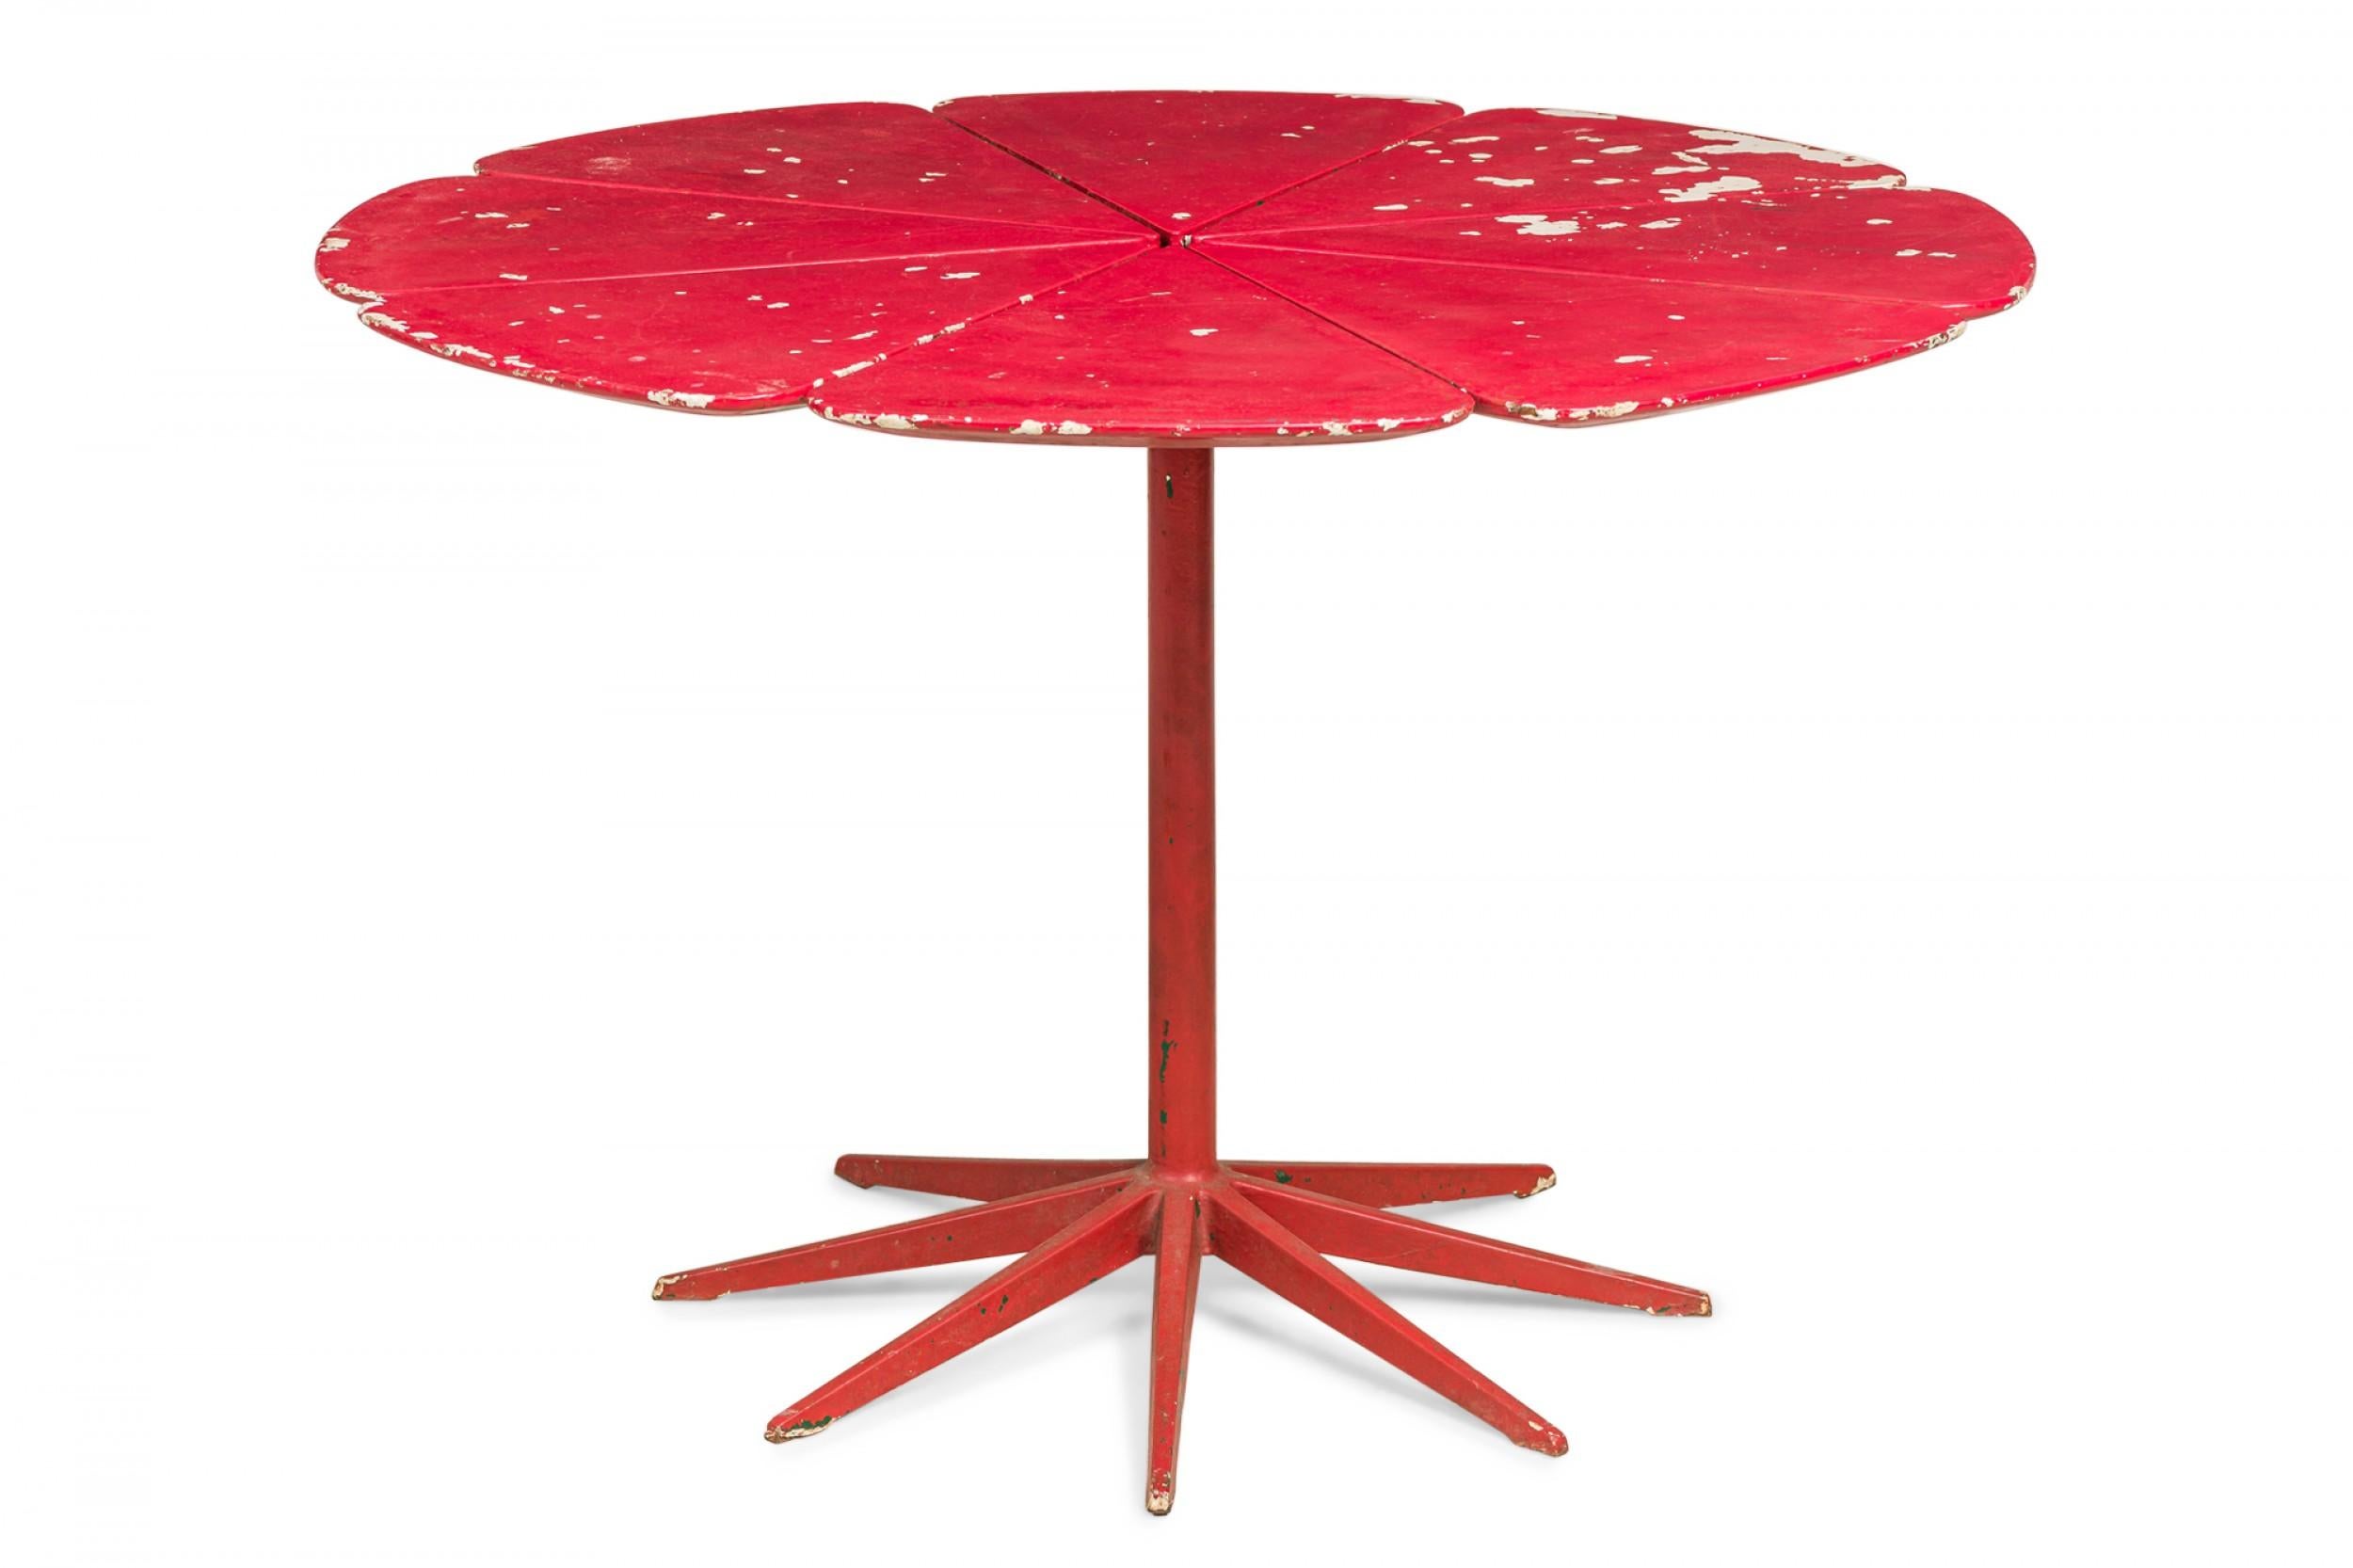 American Mid-Century 'petal' form center table made of redwood and finished with red lacquer, resting on a pedestal base. (RICHARD SCHULTZ FOR KNOLL INTERNATIONAL).
 